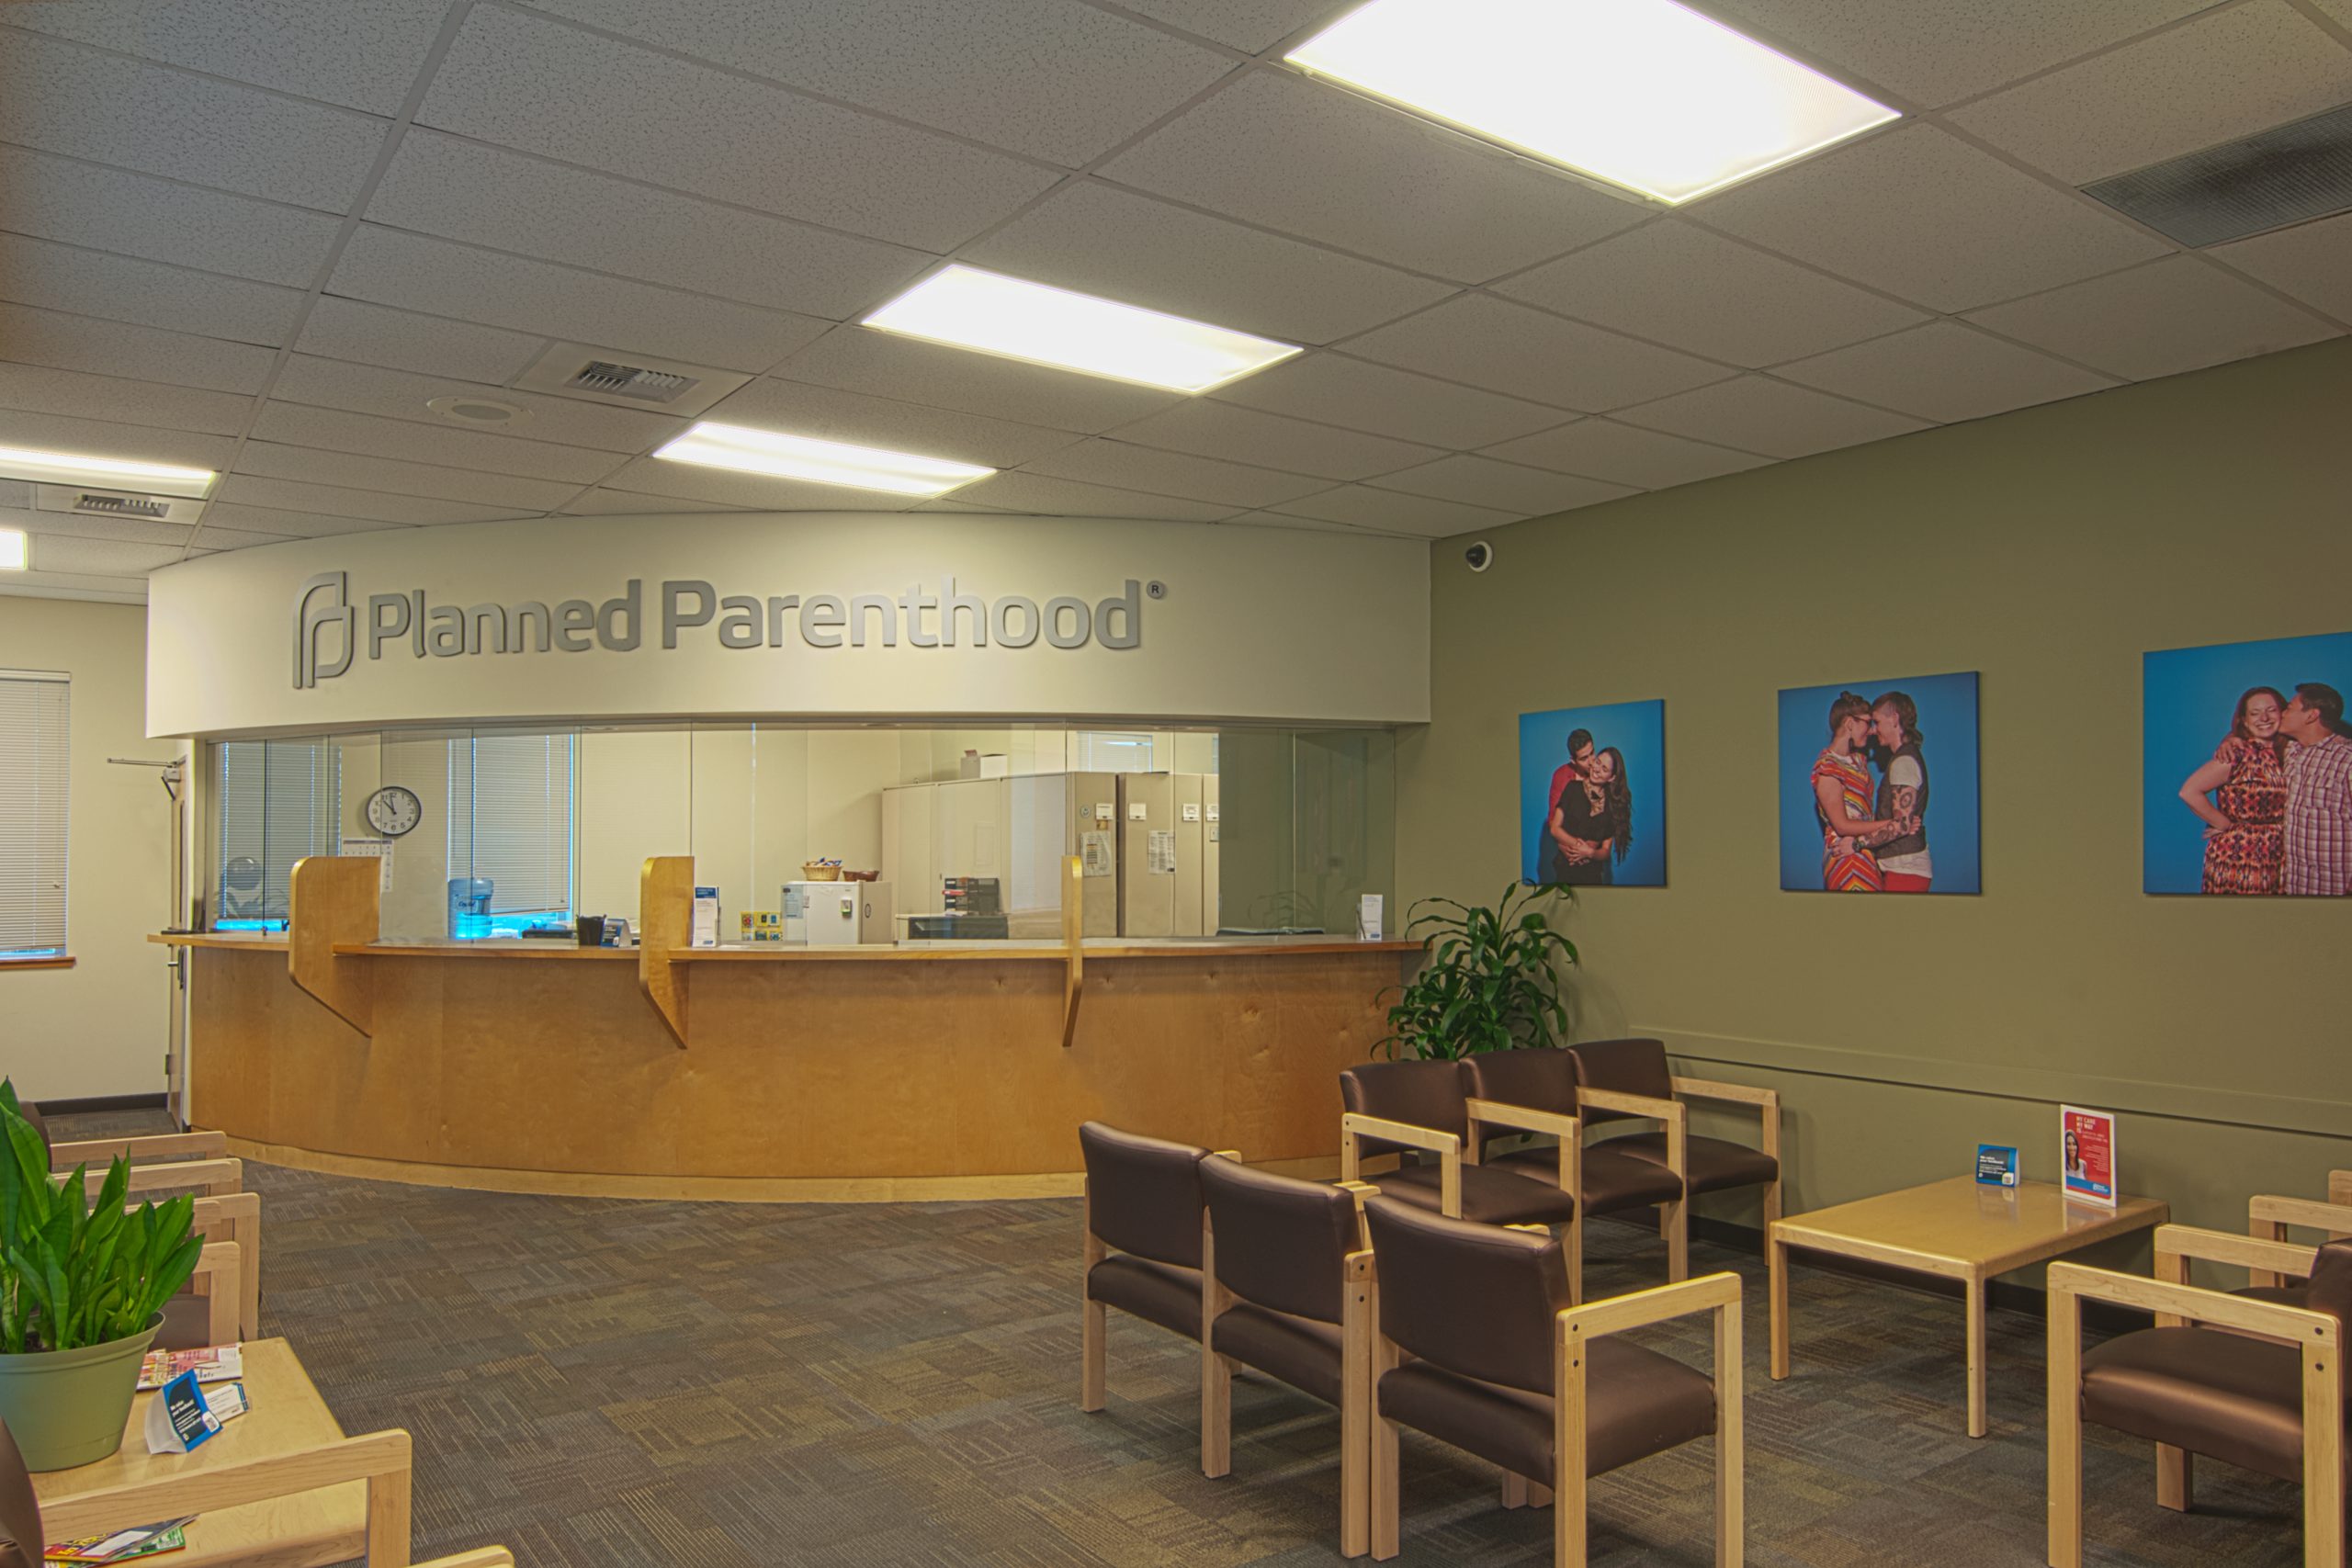 A Planned Parenthood waiting room that shows empty chair in a medical building